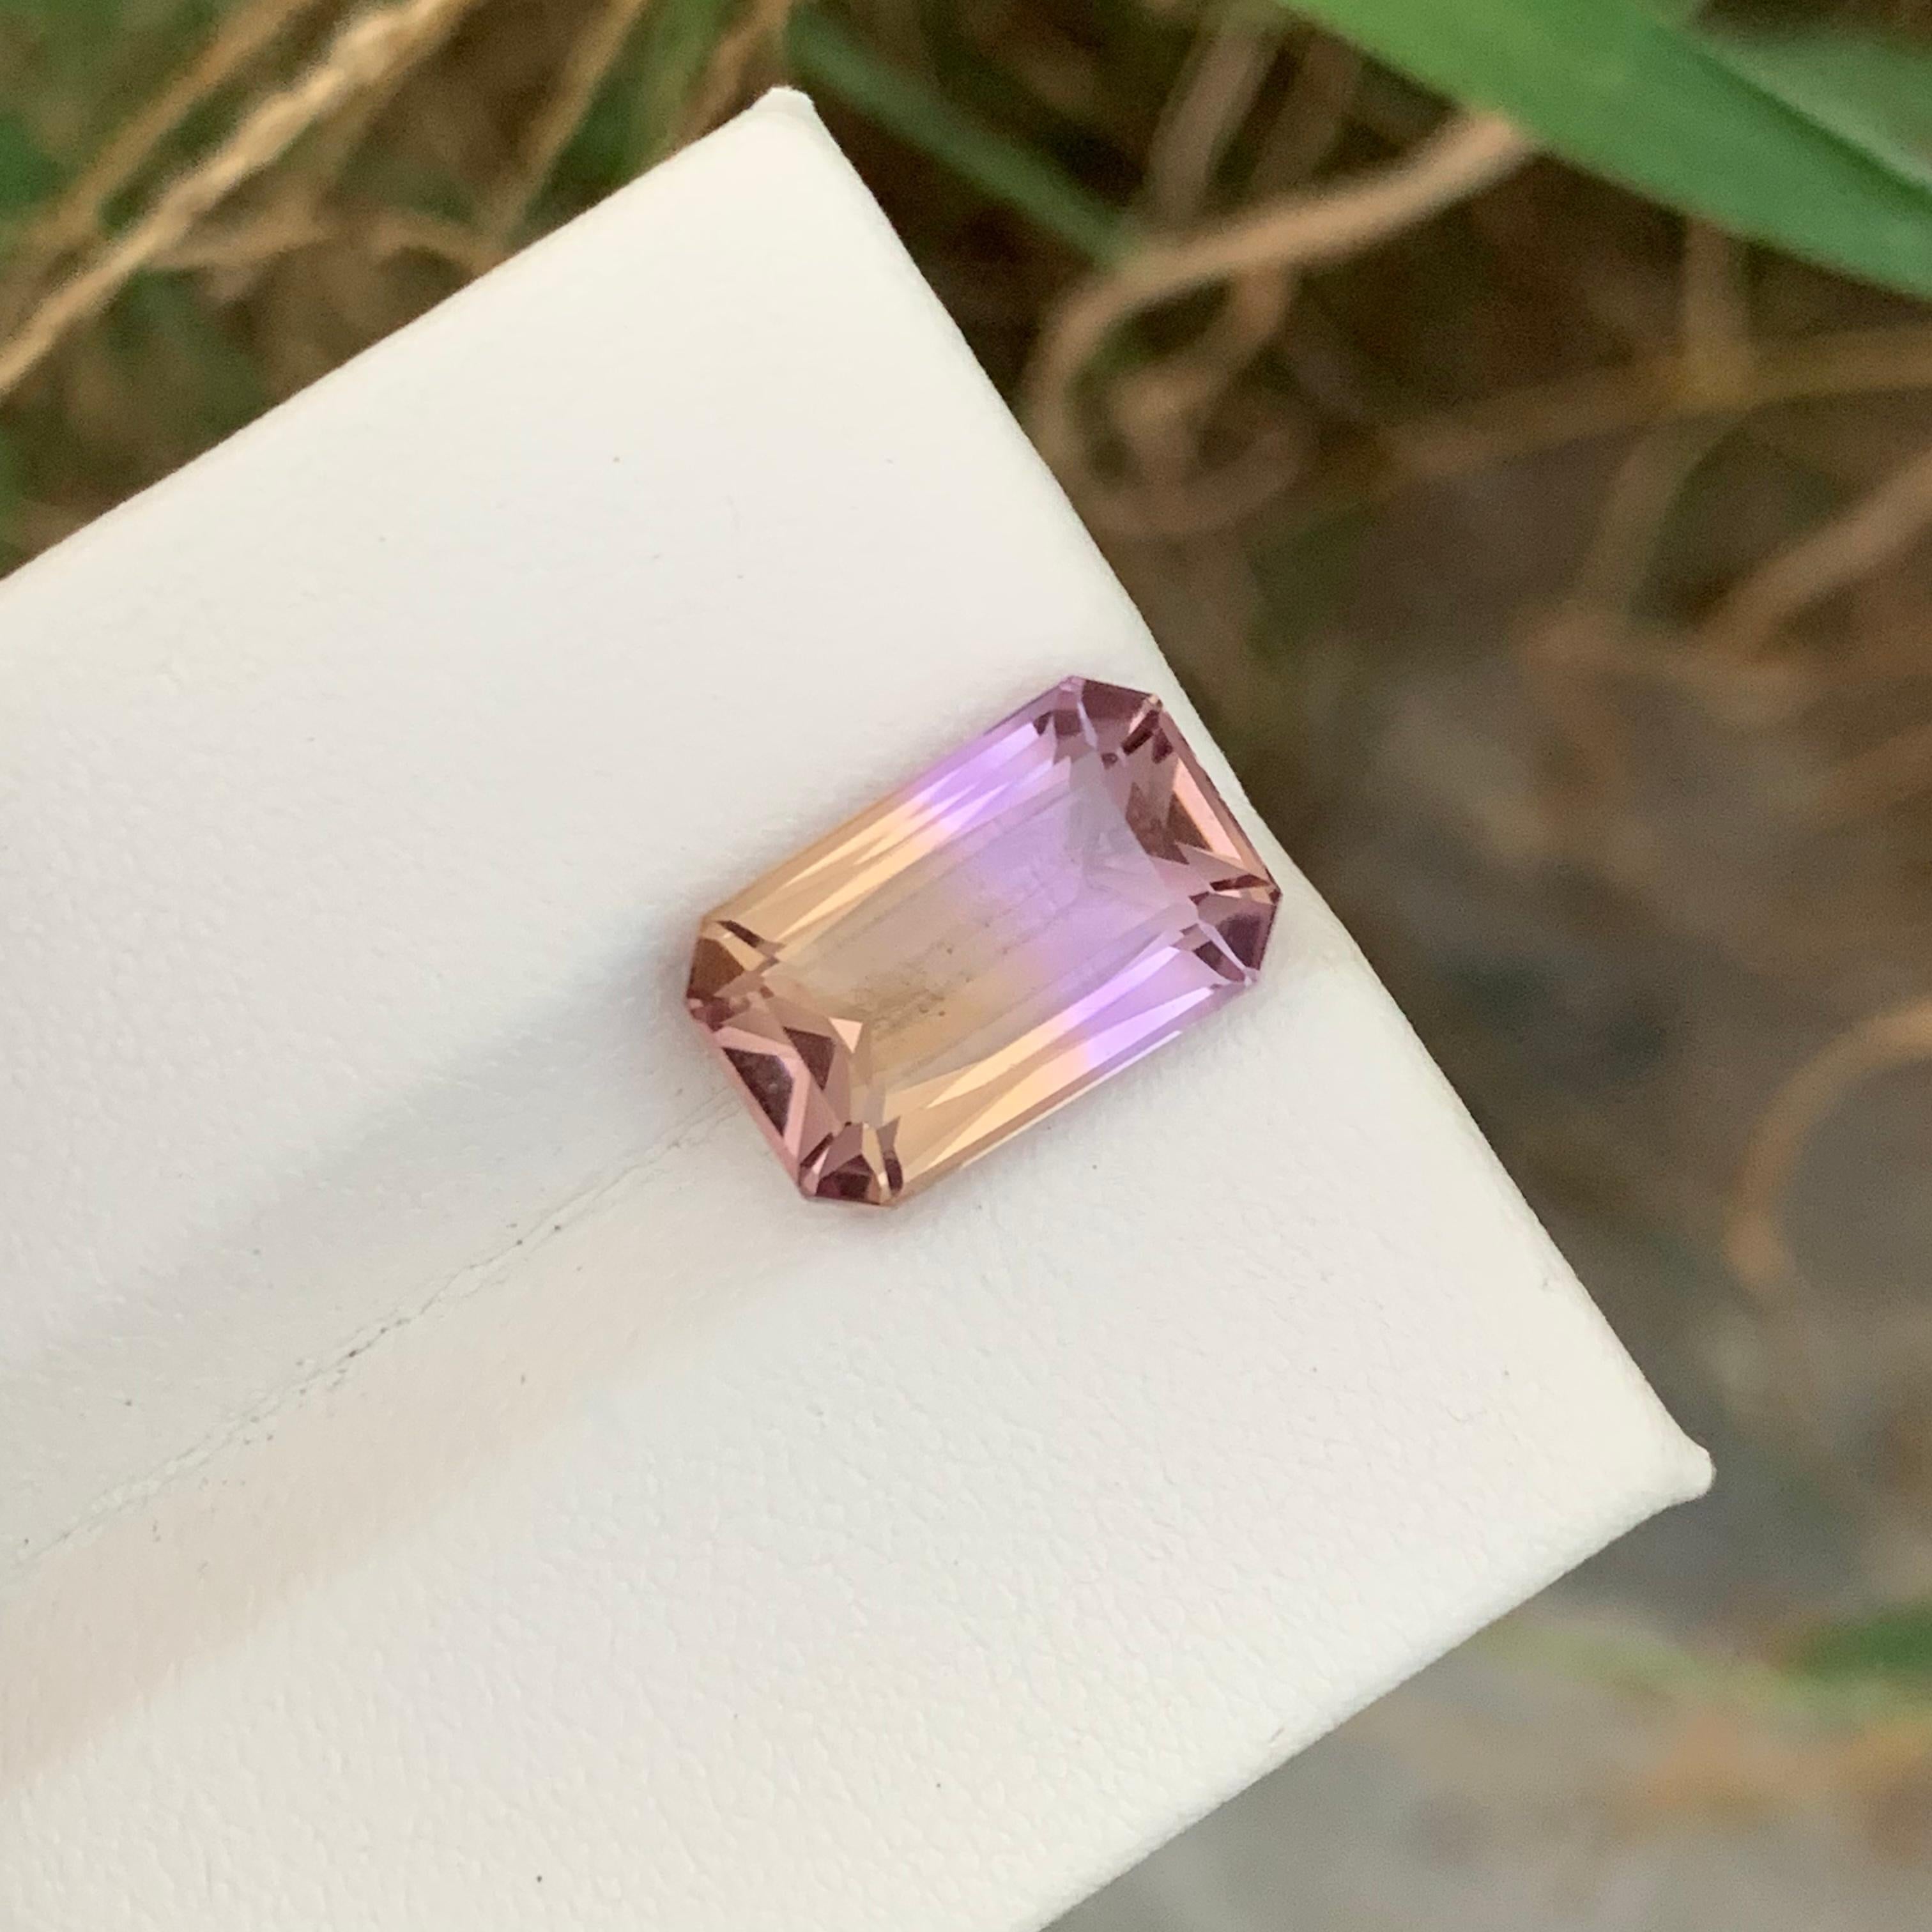 Arts and Crafts 6.50 Carats Faceted Natural Ametrine Ring Gem Emerald Shape From Brazil Mine For Sale